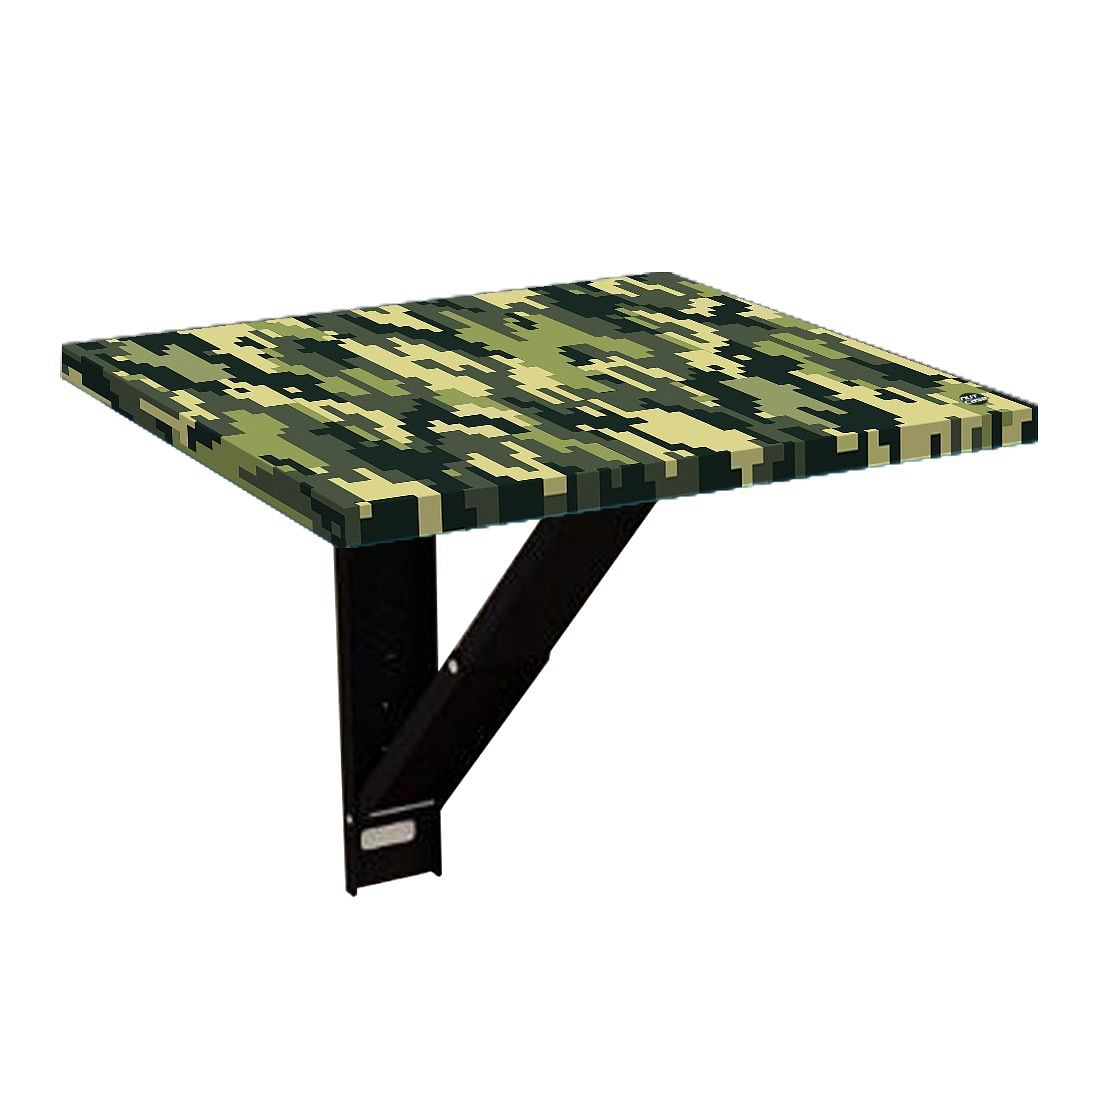 Fold Down Wall Mounted Folding Bedside Table With Desk - 8 Bit Camouflage Nutcase